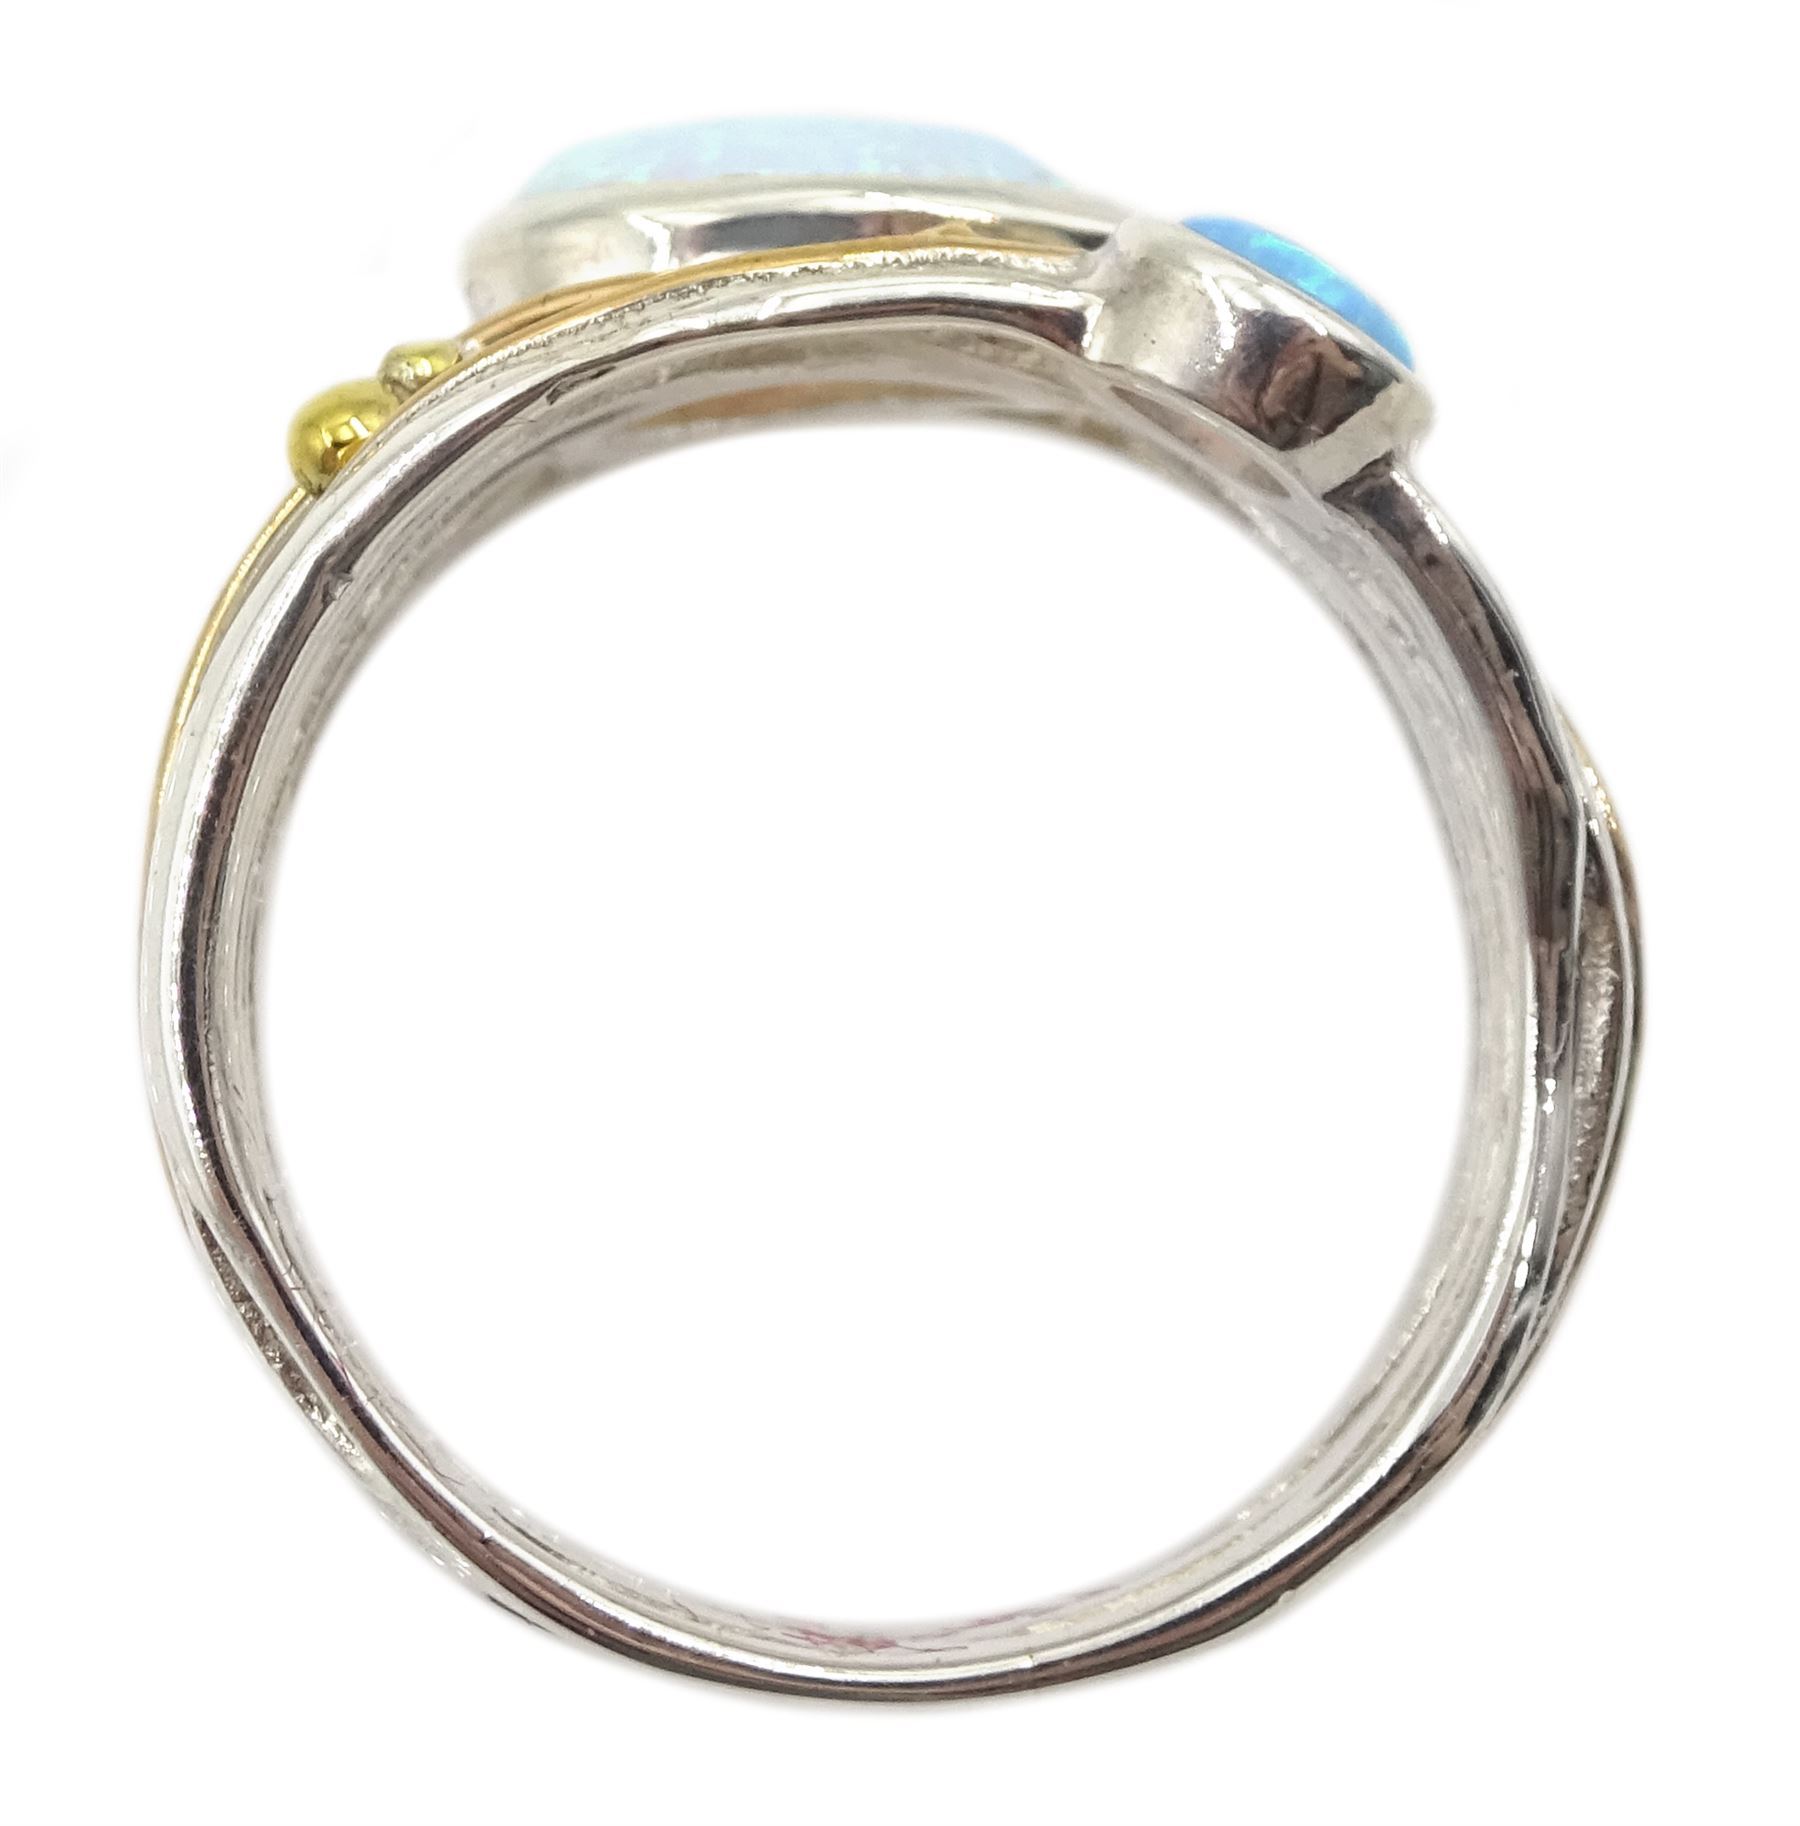 Silver and 14ct gold wire two stone opal ring - Image 4 of 4